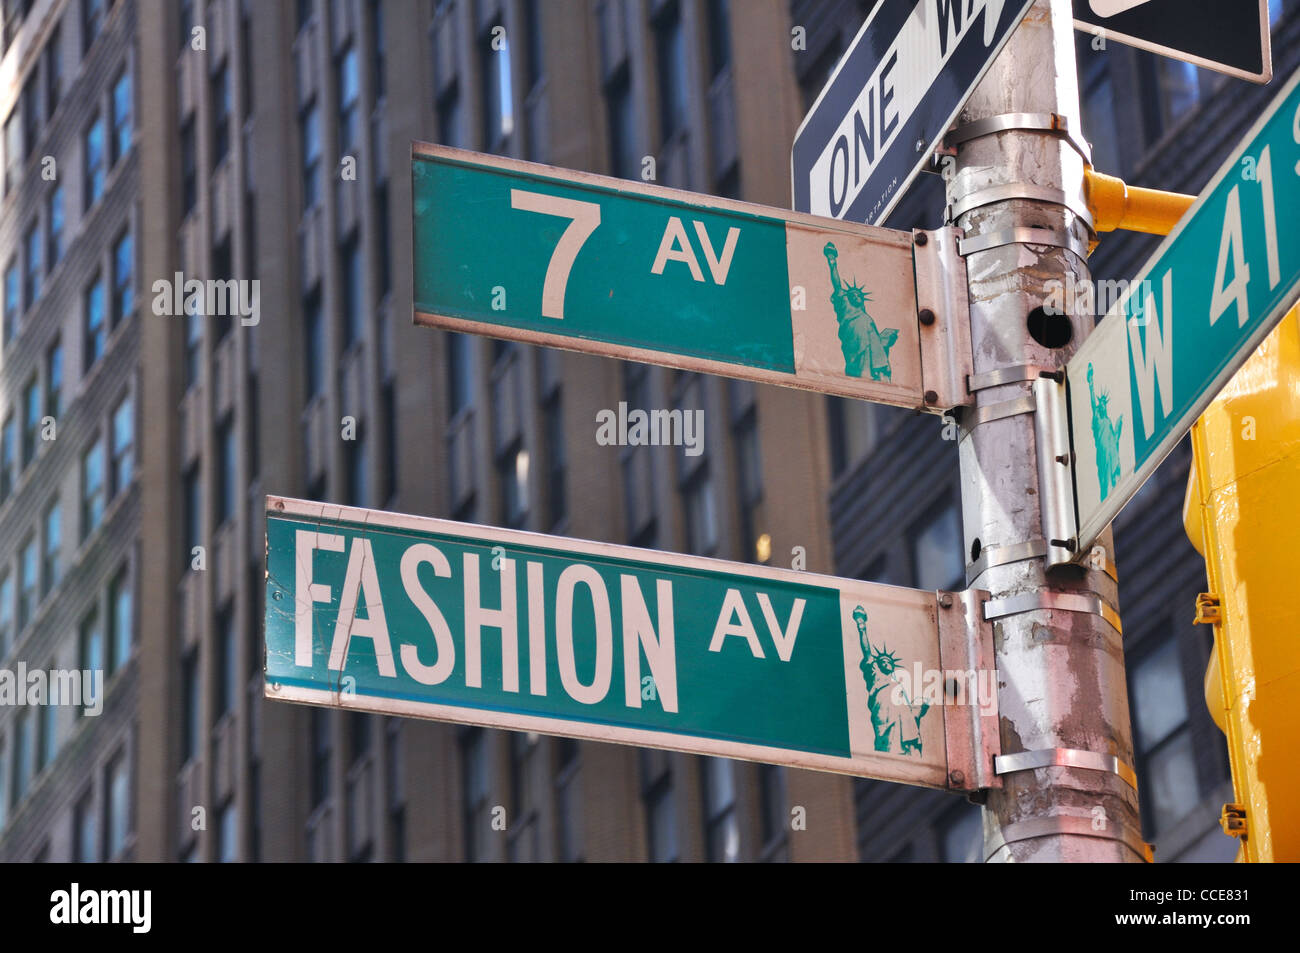 Fashion Avenue and 7th Avenue street signs, New York, USA Stock